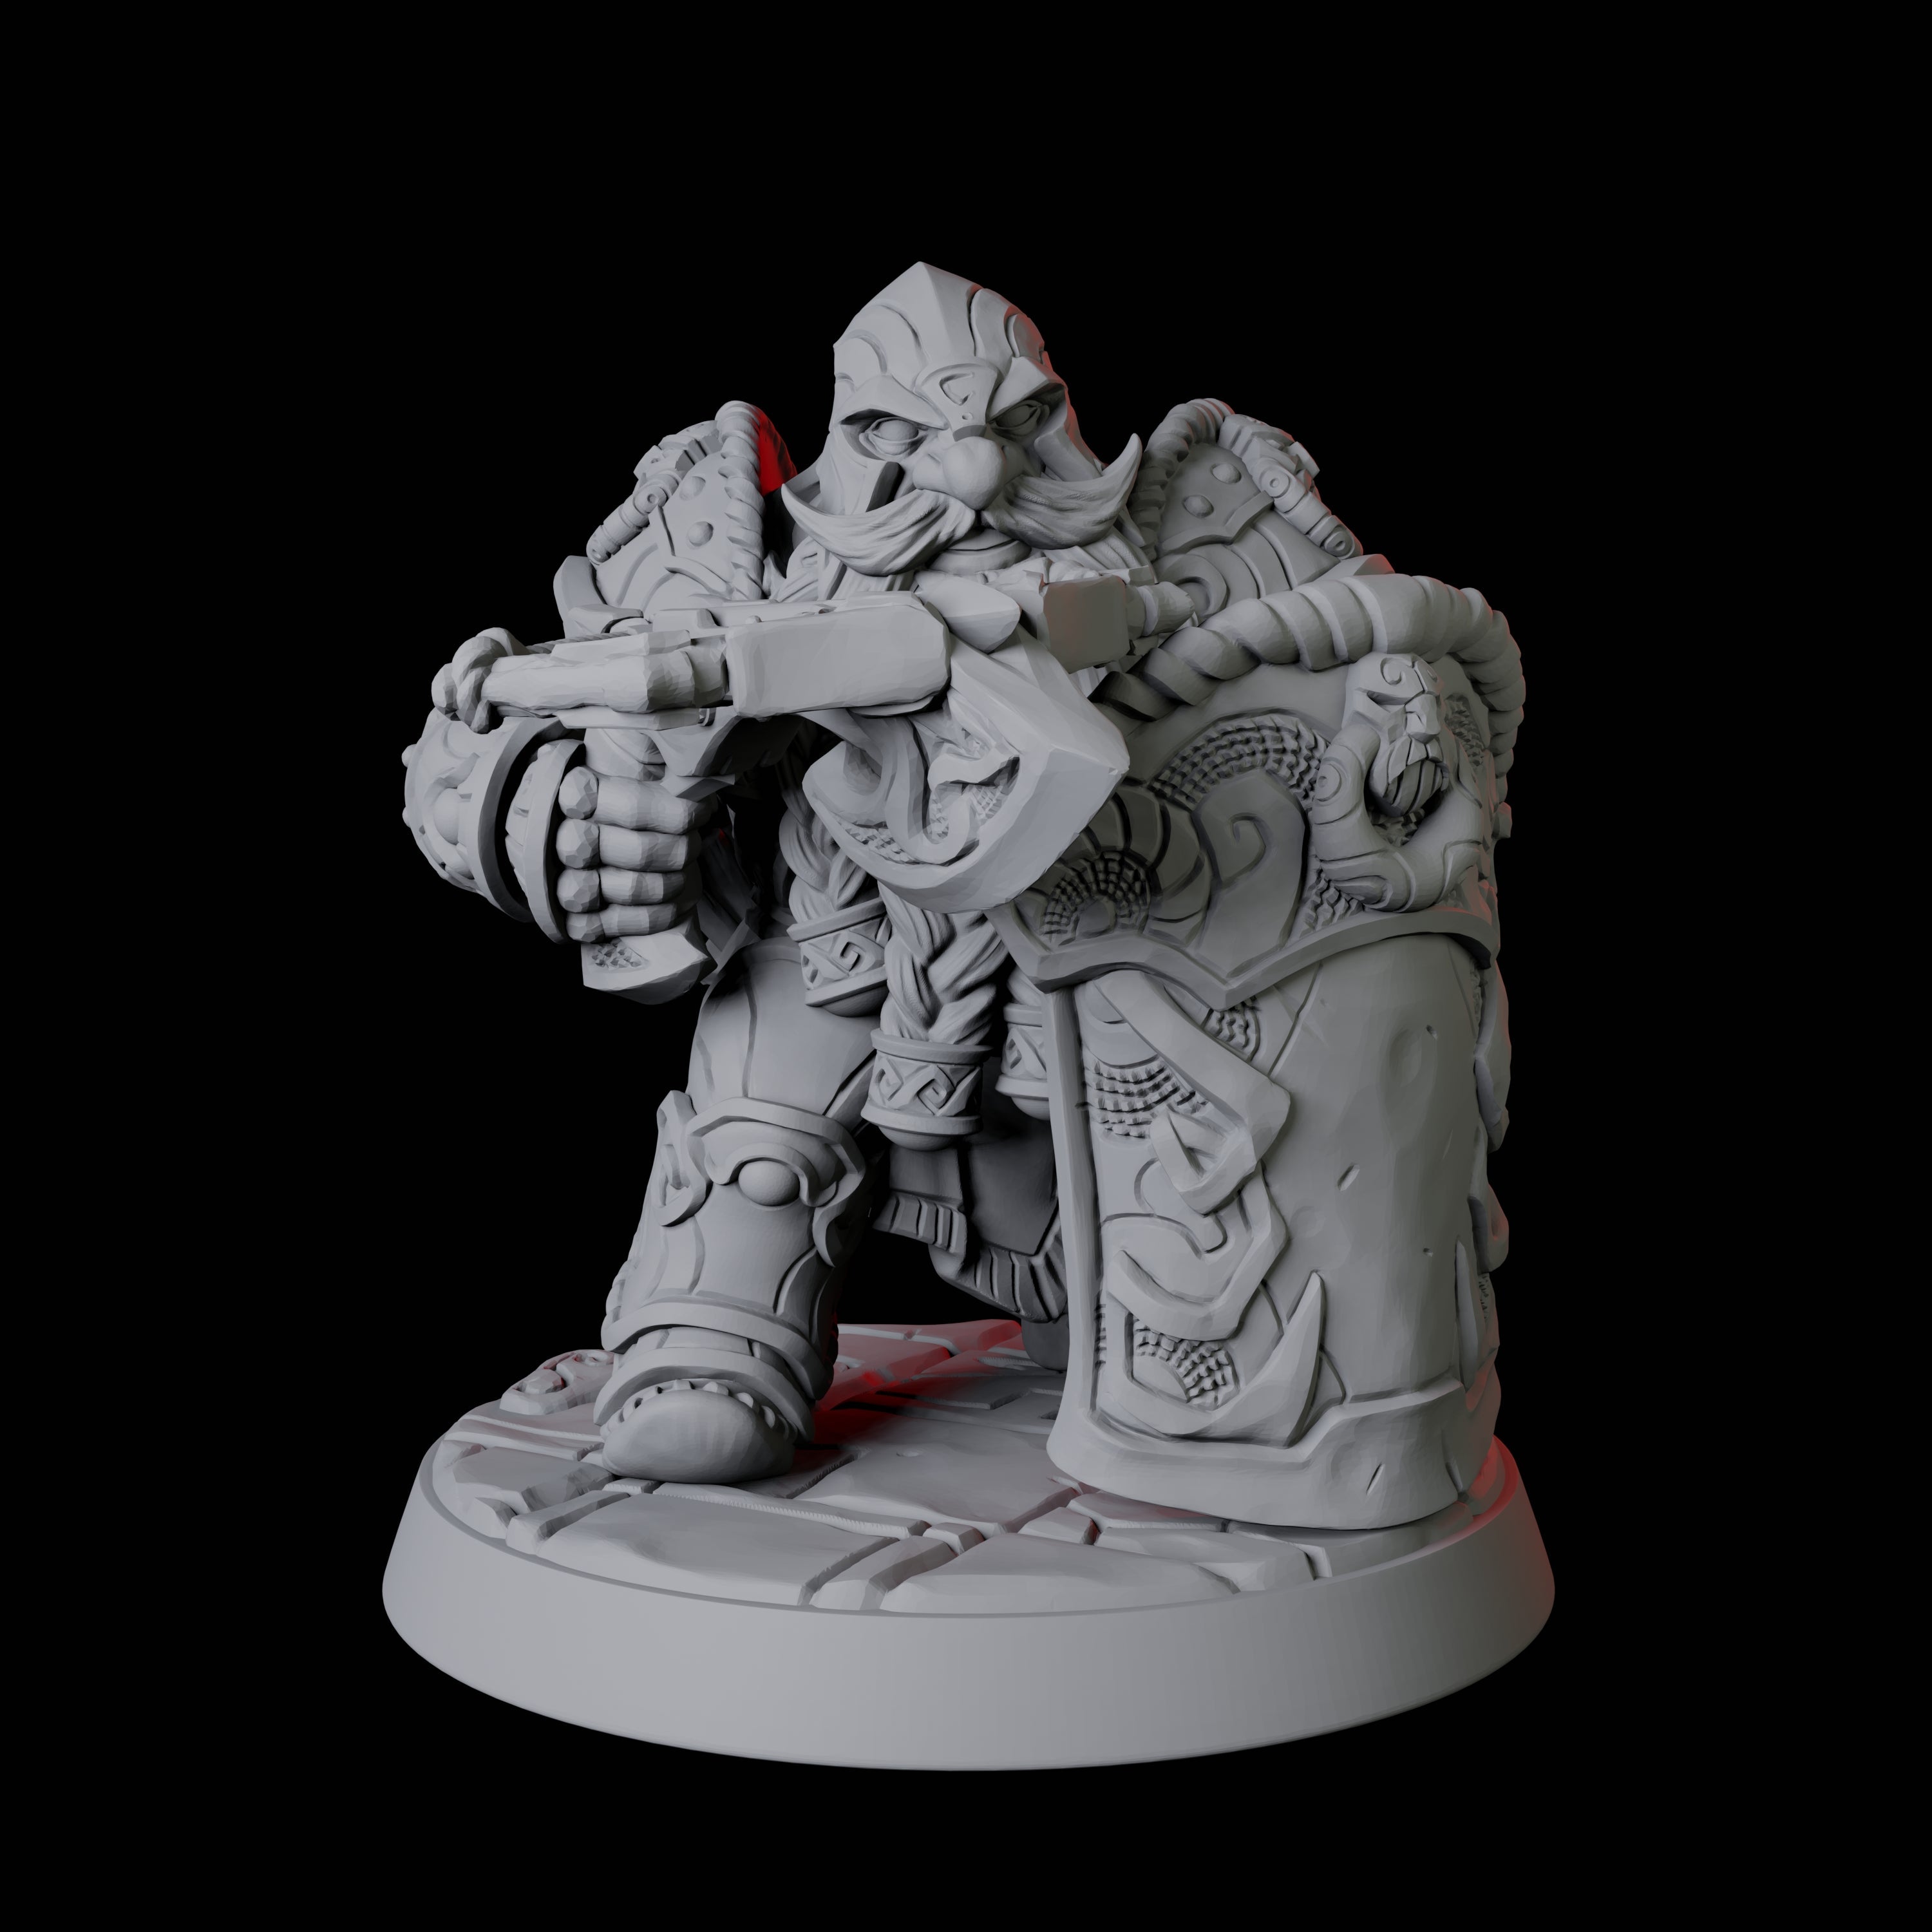 City Guard Dwarf C Miniature for Dungeons and Dragons, Pathfinder or other TTRPGs